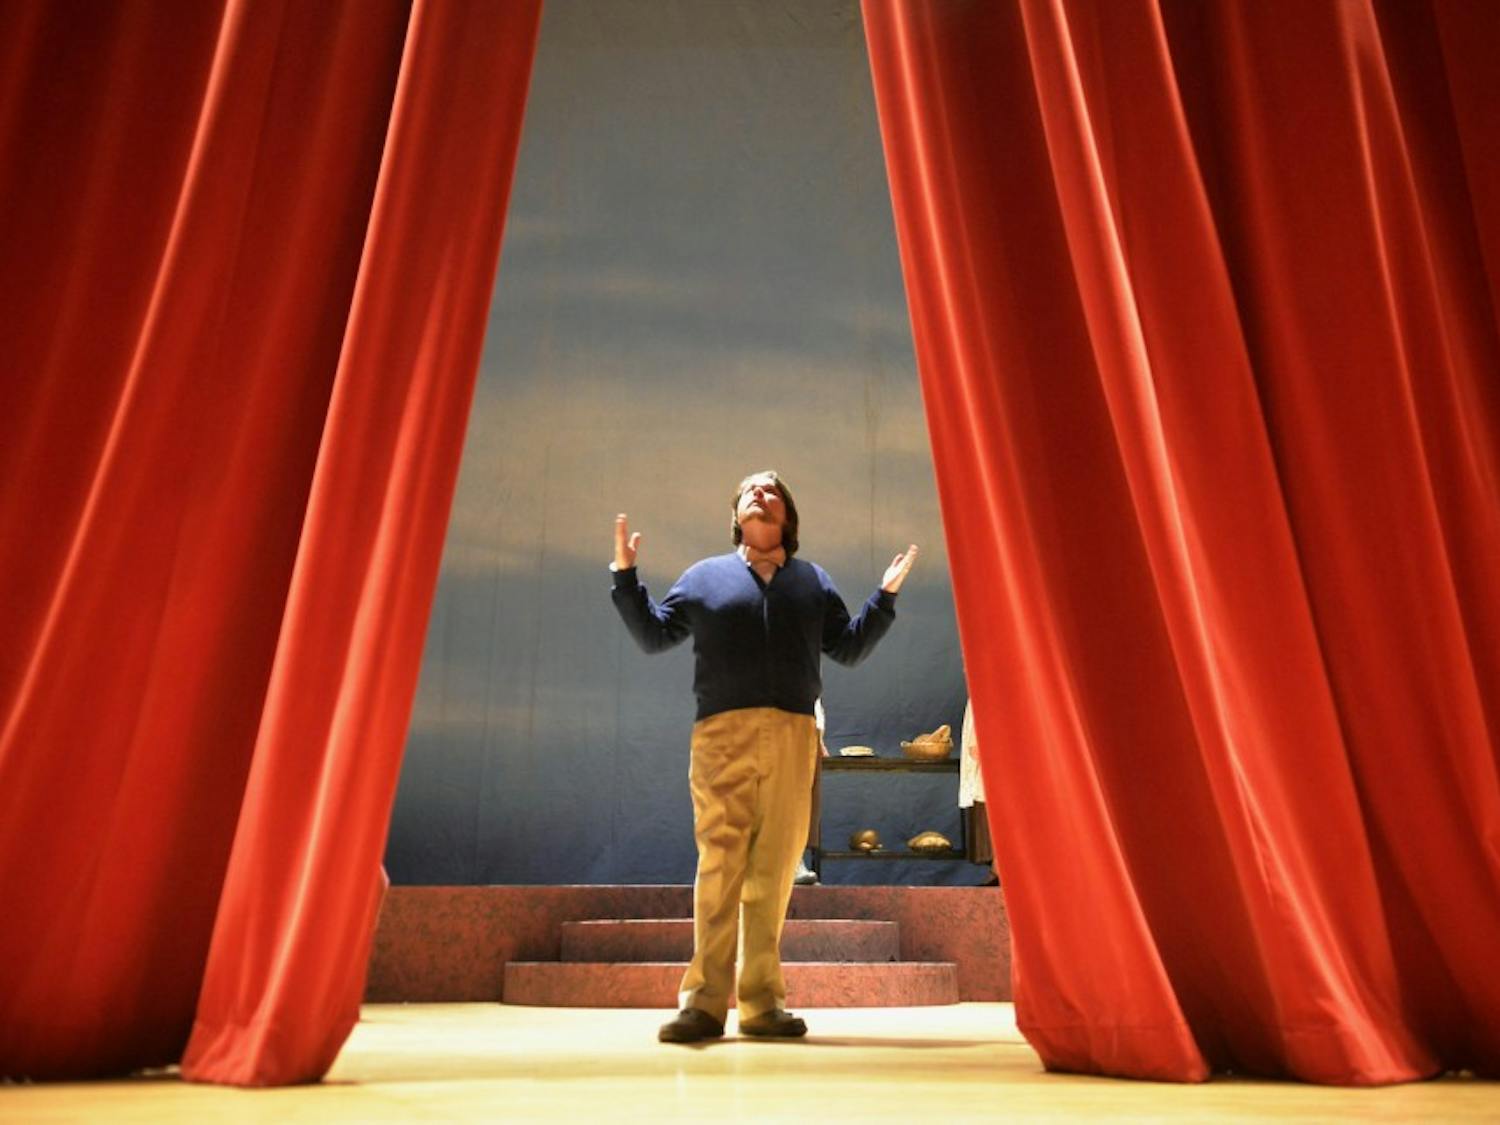 Eric Wilcox guides the main curtain during a rehearsal at Keller Hall on Monday. Wilcox is the narrator of “Tales from the Opera Crypt,” a play that features scenes from “Macbeth,” “Sweeney Todd” and “Into the Woods”.